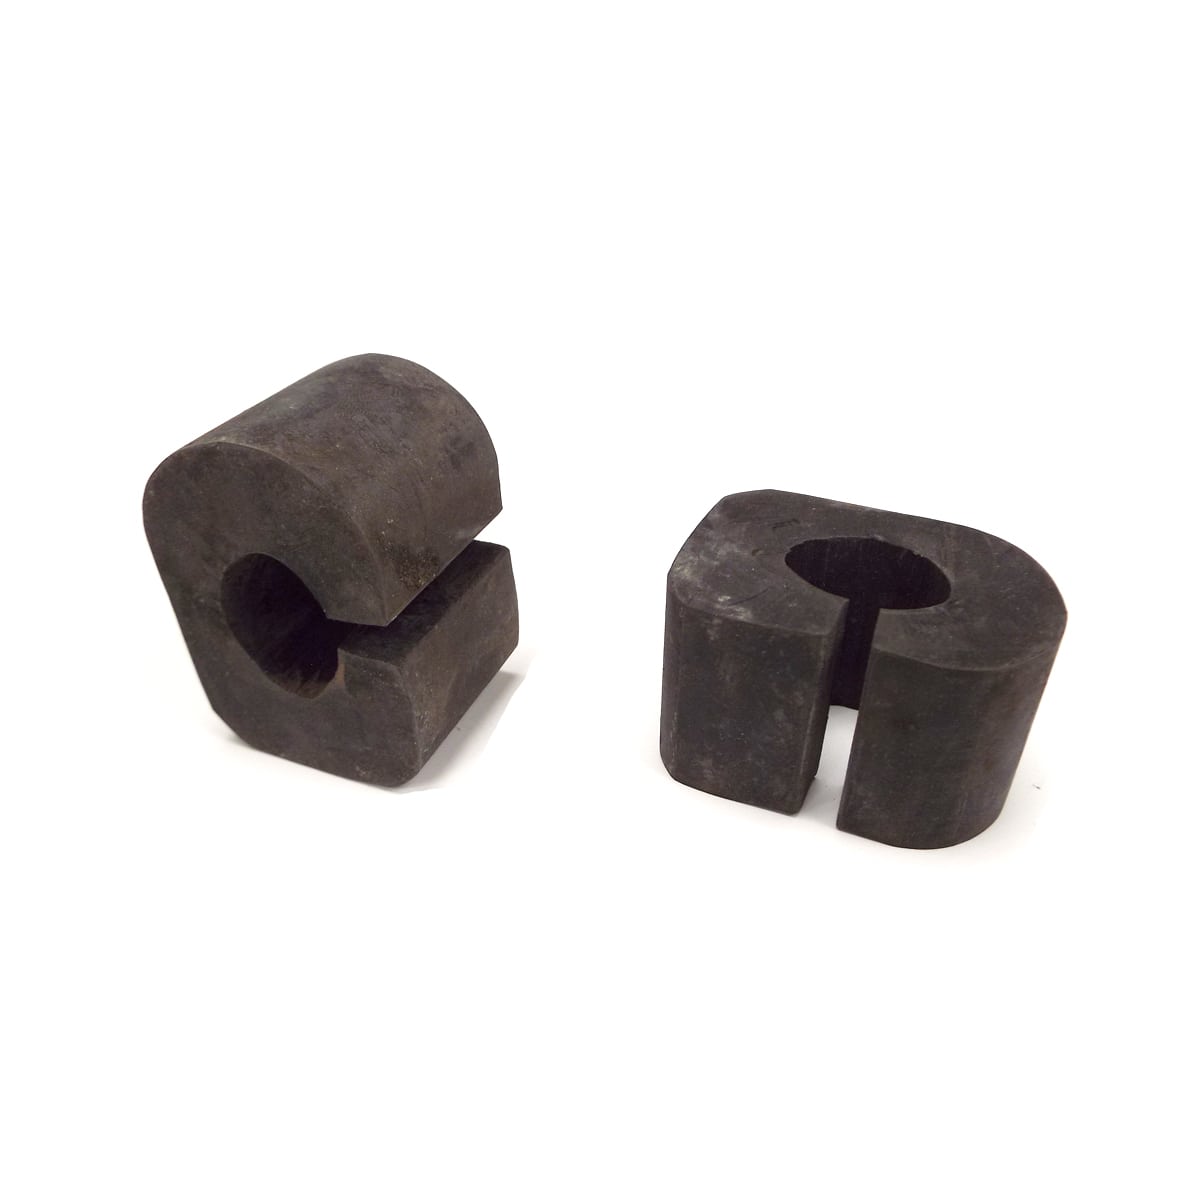 1965-1967 Front Stabilizer Suspension Bushings Chevrolet and GMC Pickup Truck